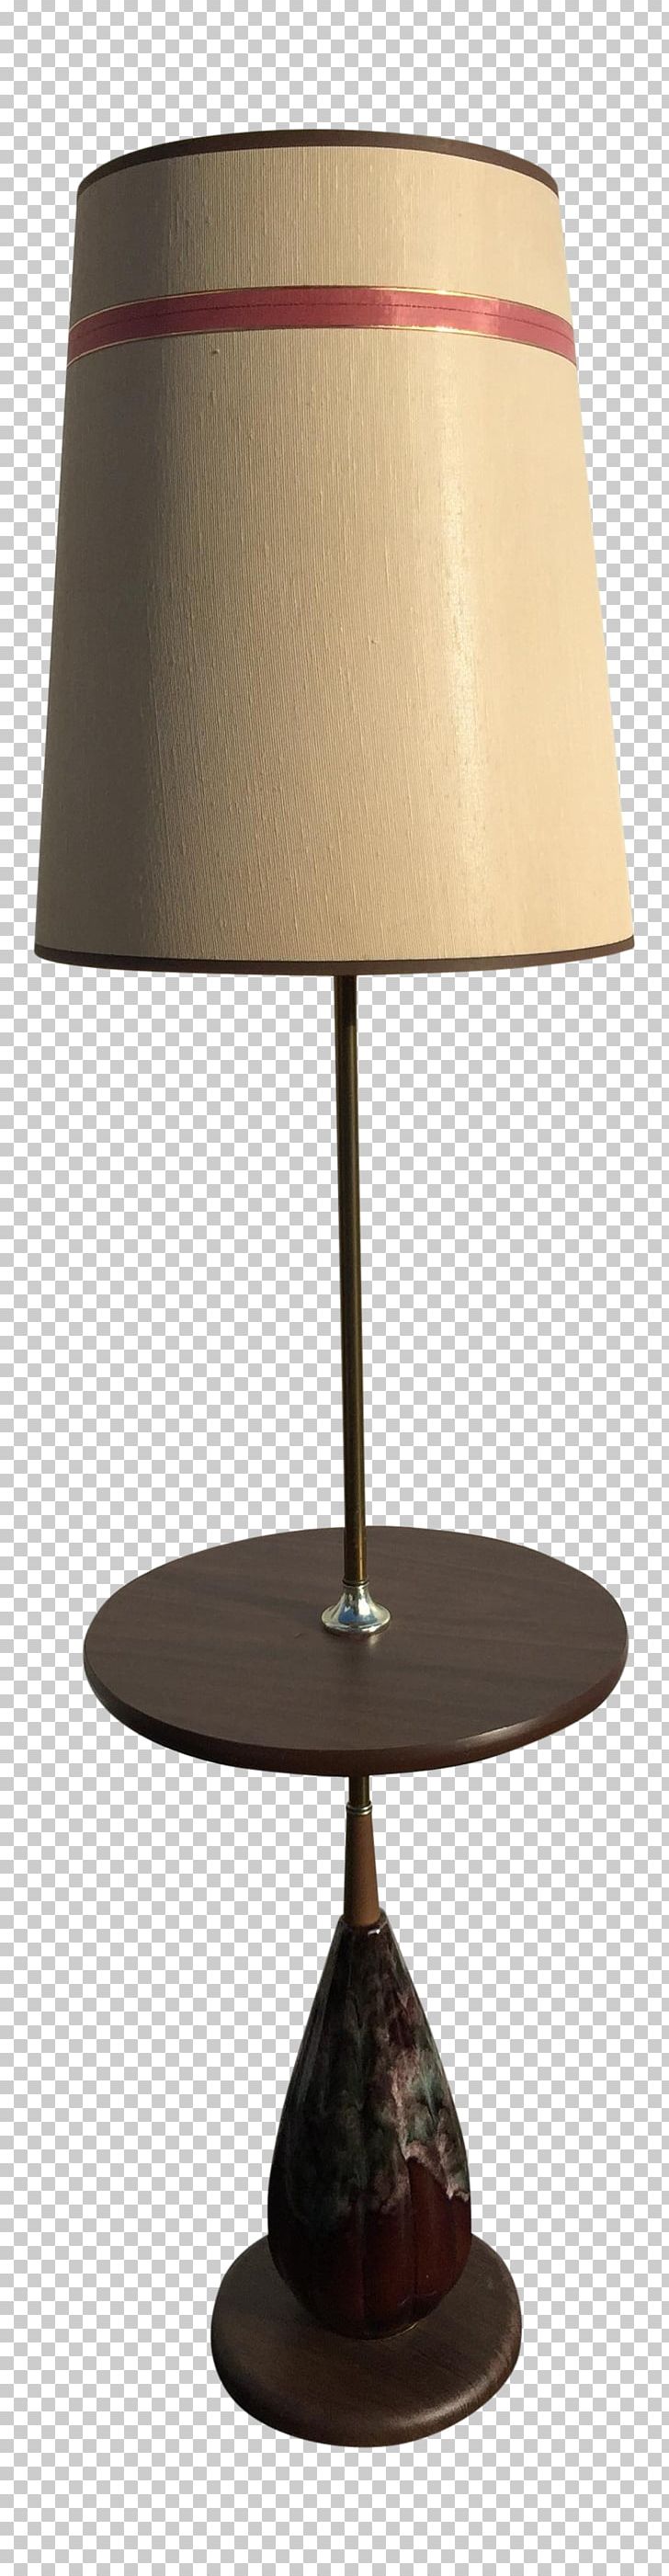 Lamp Shades Lava Lamp Electric Light Floor PNG, Clipart, Ceramic, Ceramic Glaze, Chairish, Electric Light, Floor Free PNG Download